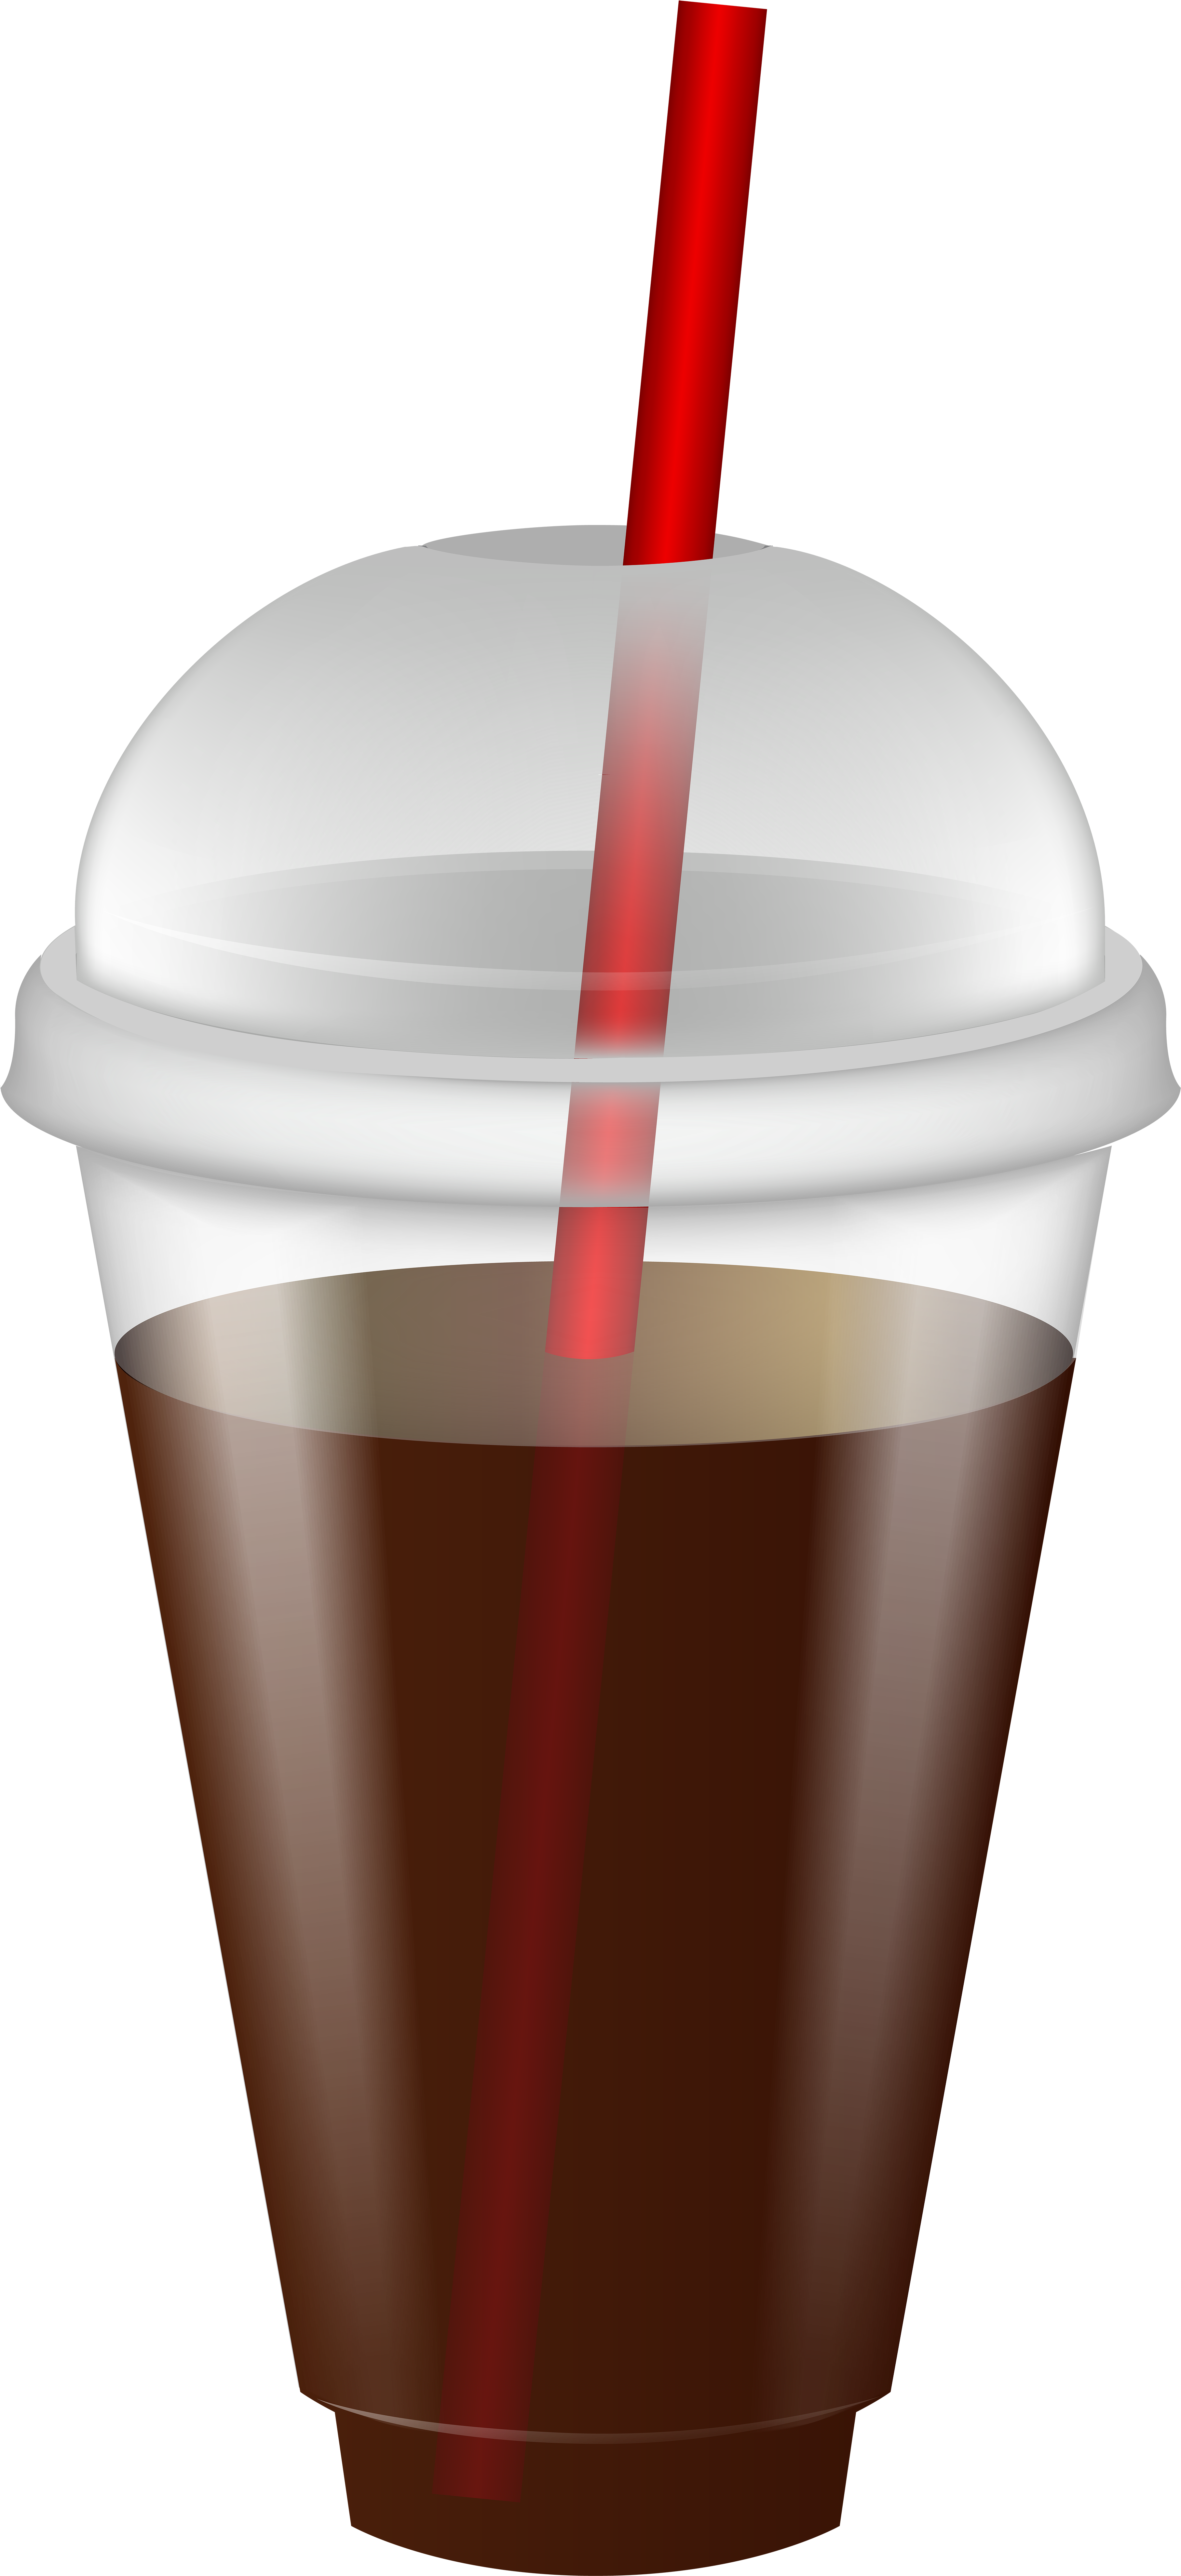 Png Royalty Free Drink In Plastic Cup With